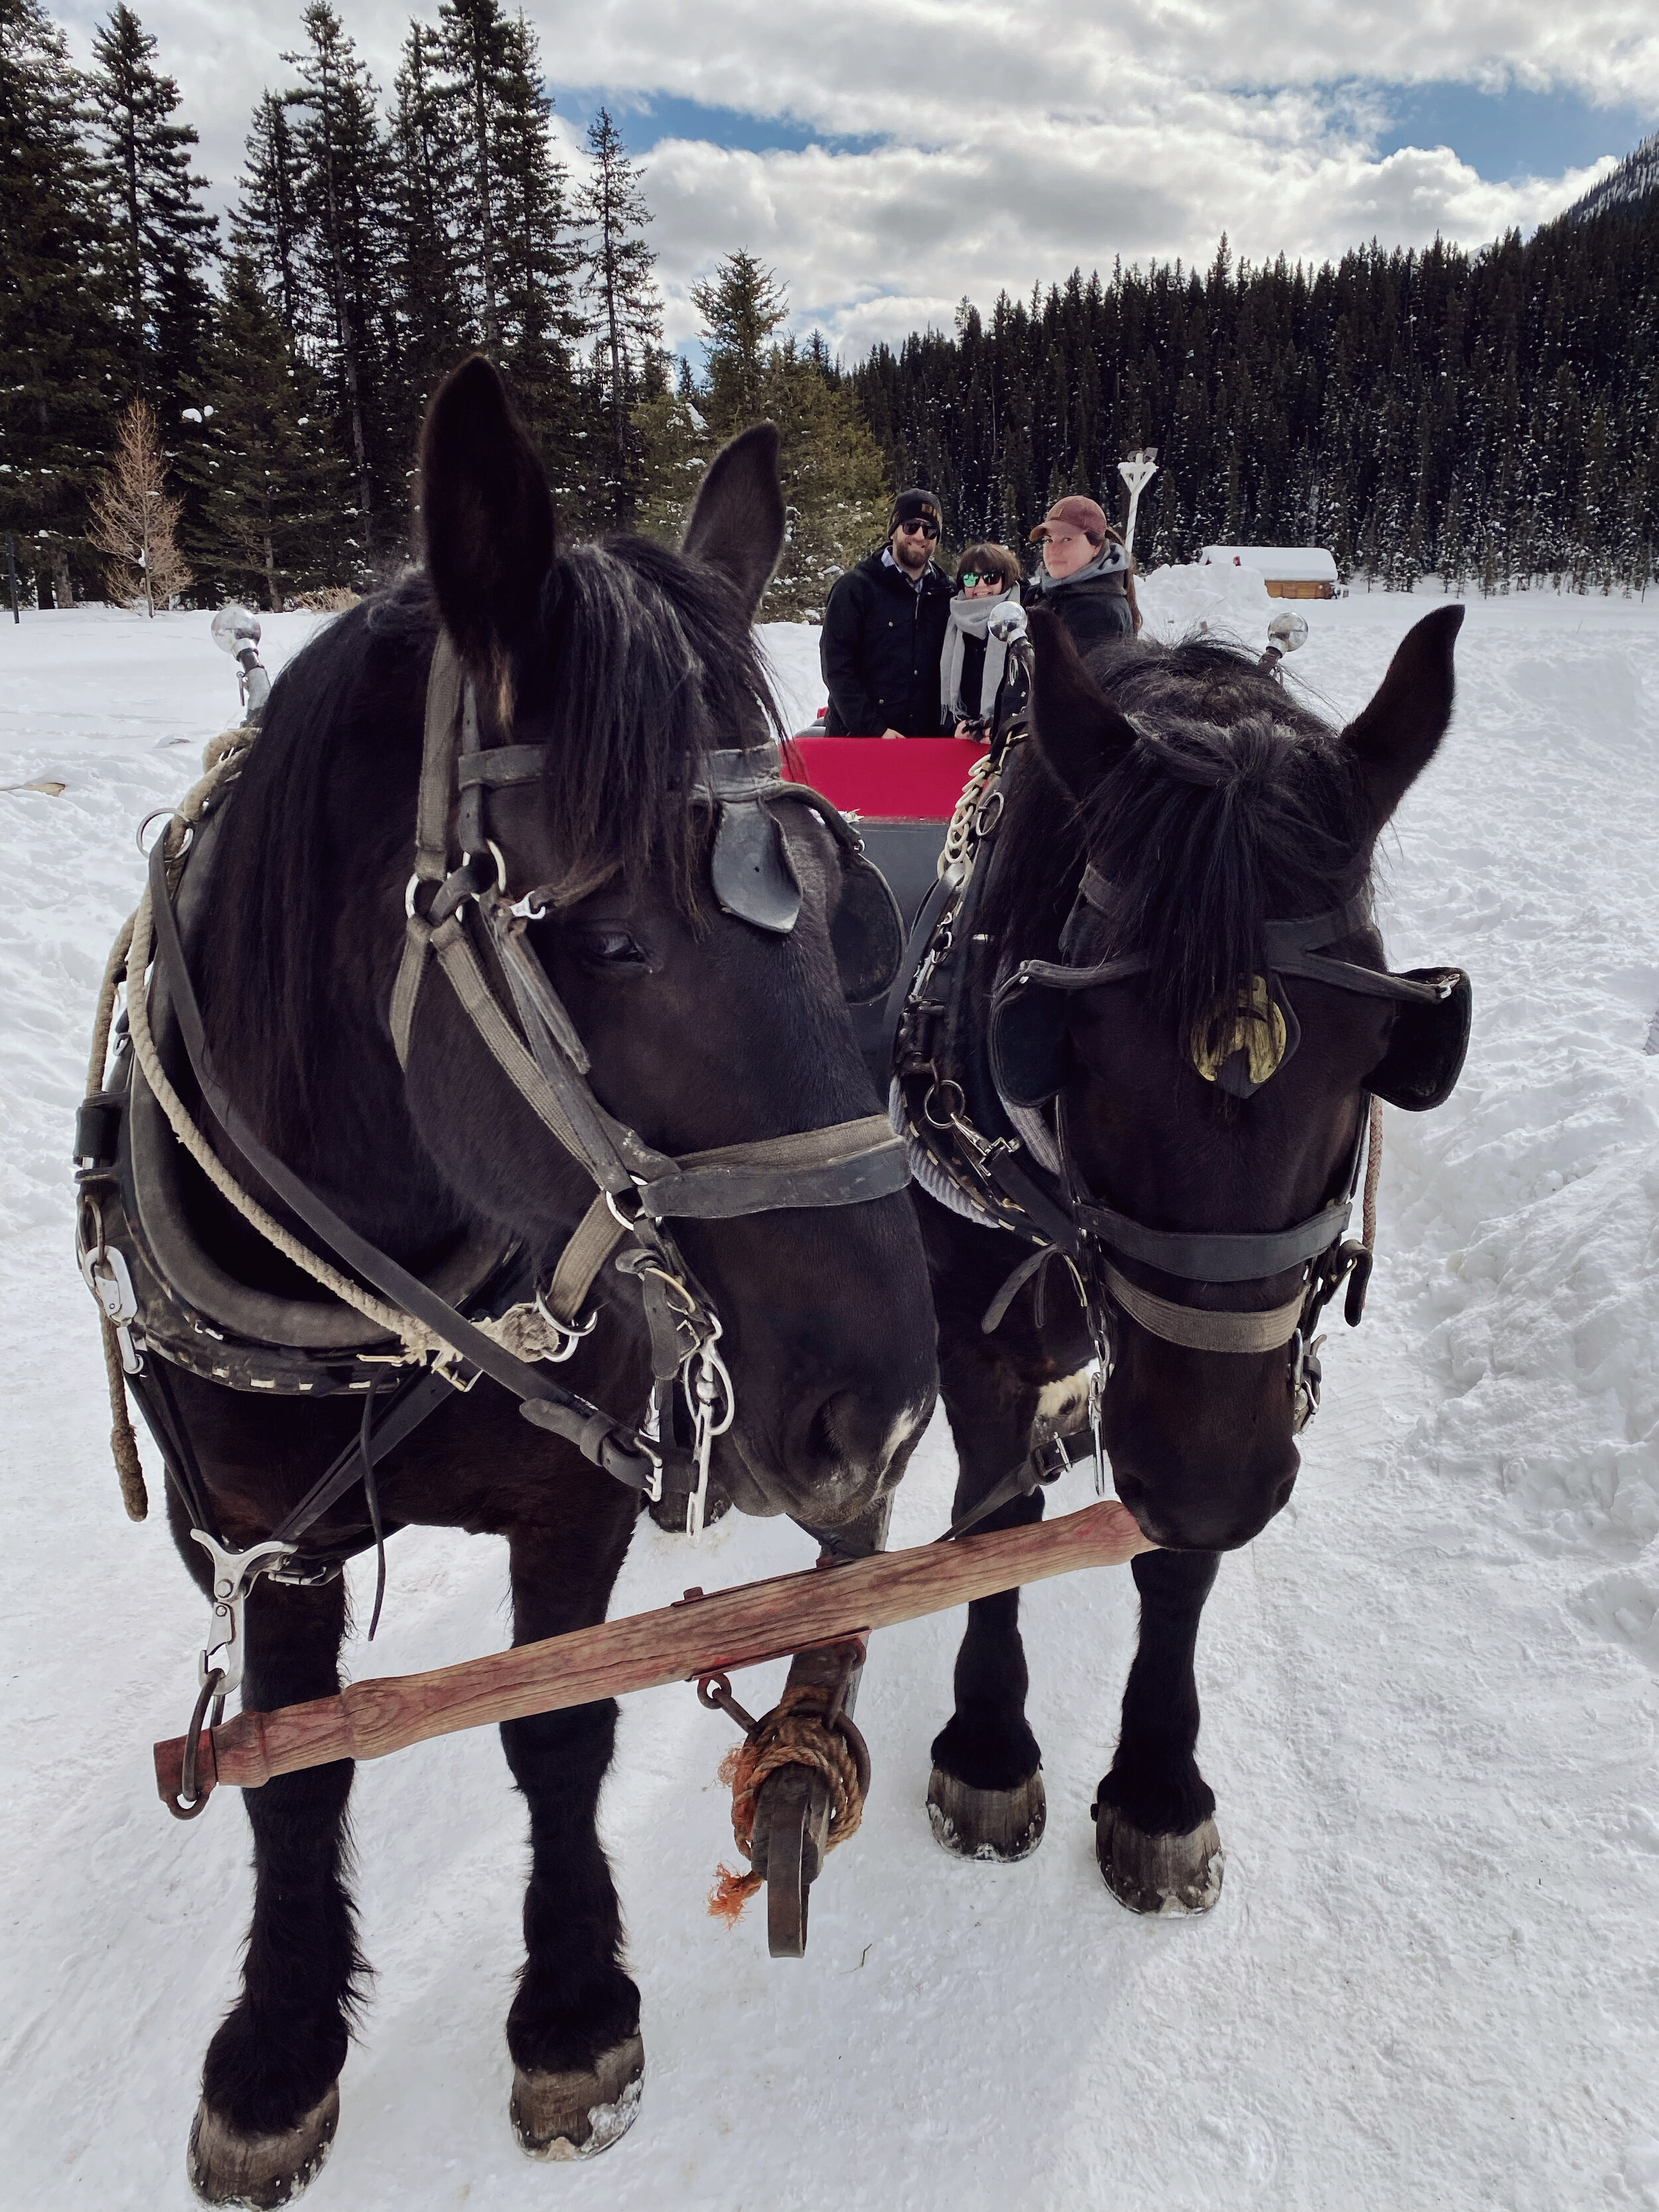 Lake Louise winter sleigh ride in the snow (Copy)